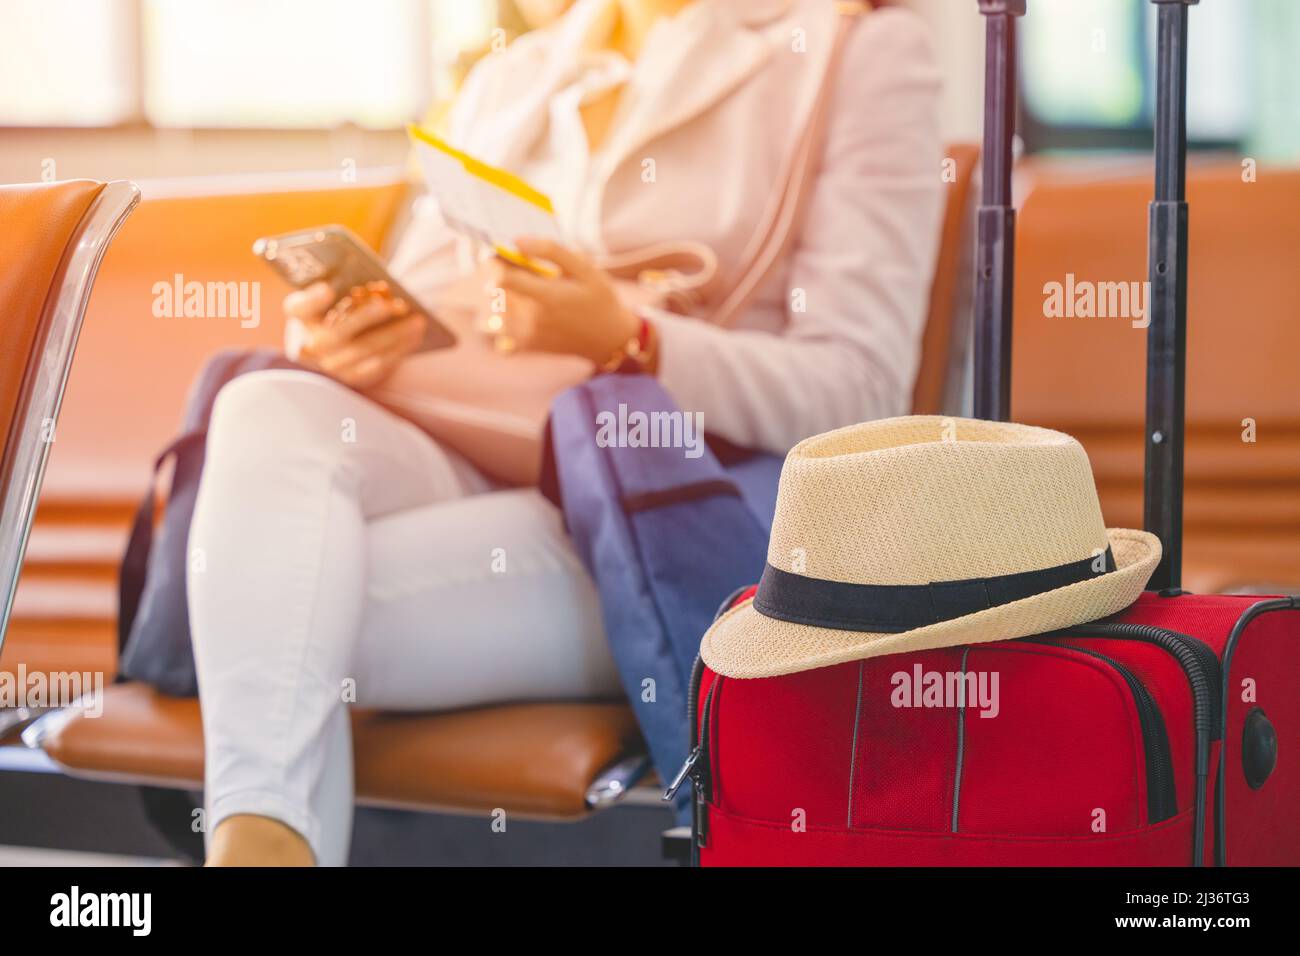 Single woman Travel luggage and ticket waiting for vacation flight in airport. Stock Photo